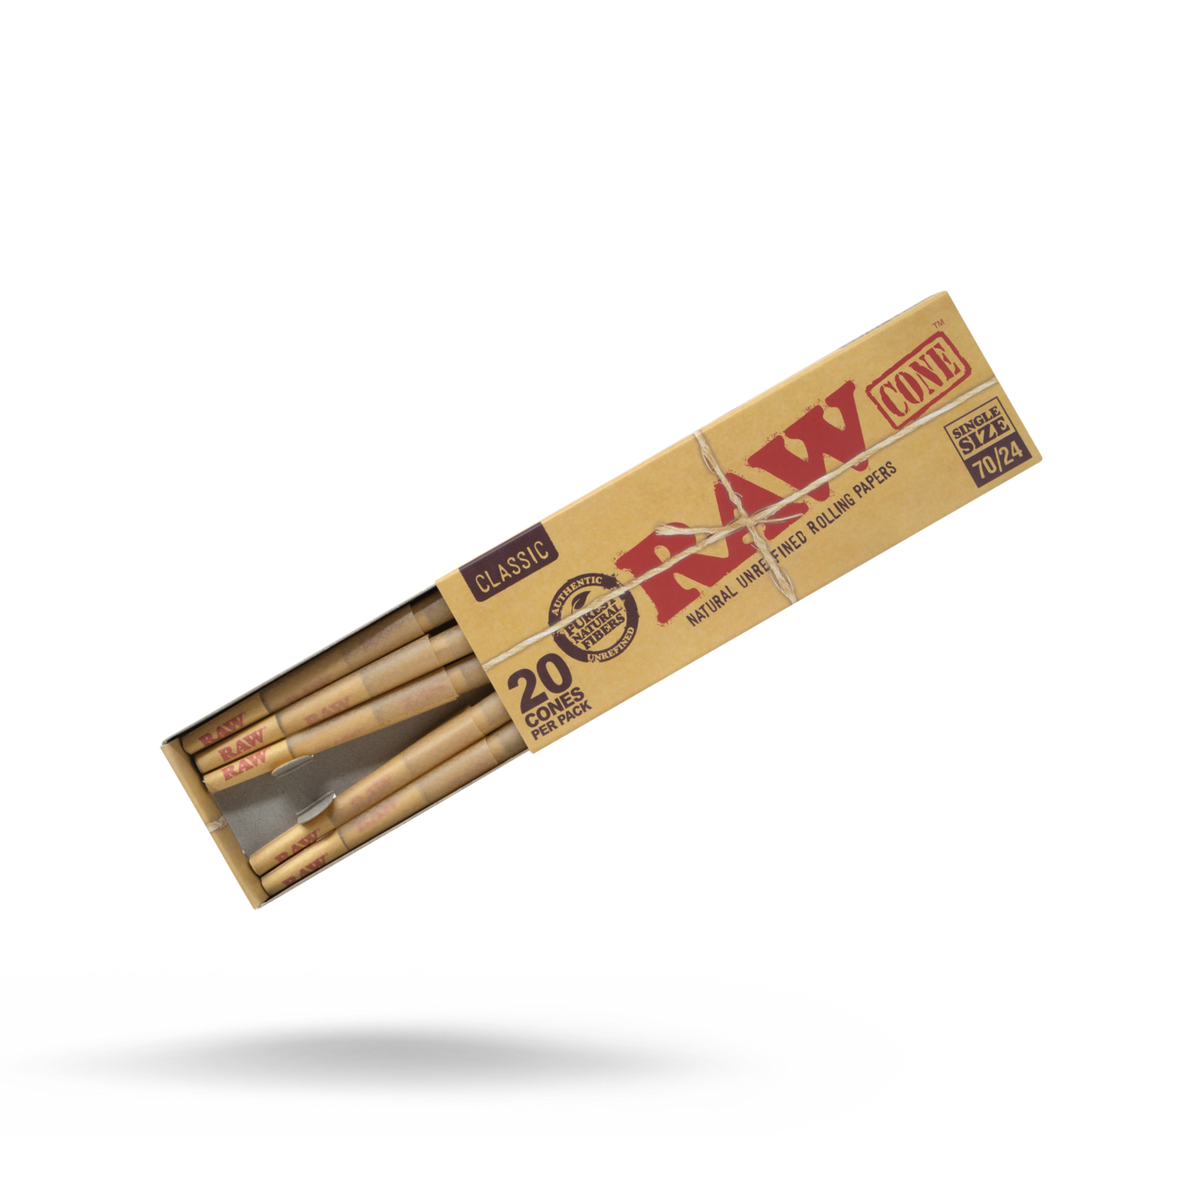 RAW Classic Single Size Cones RAW Cones esd-official